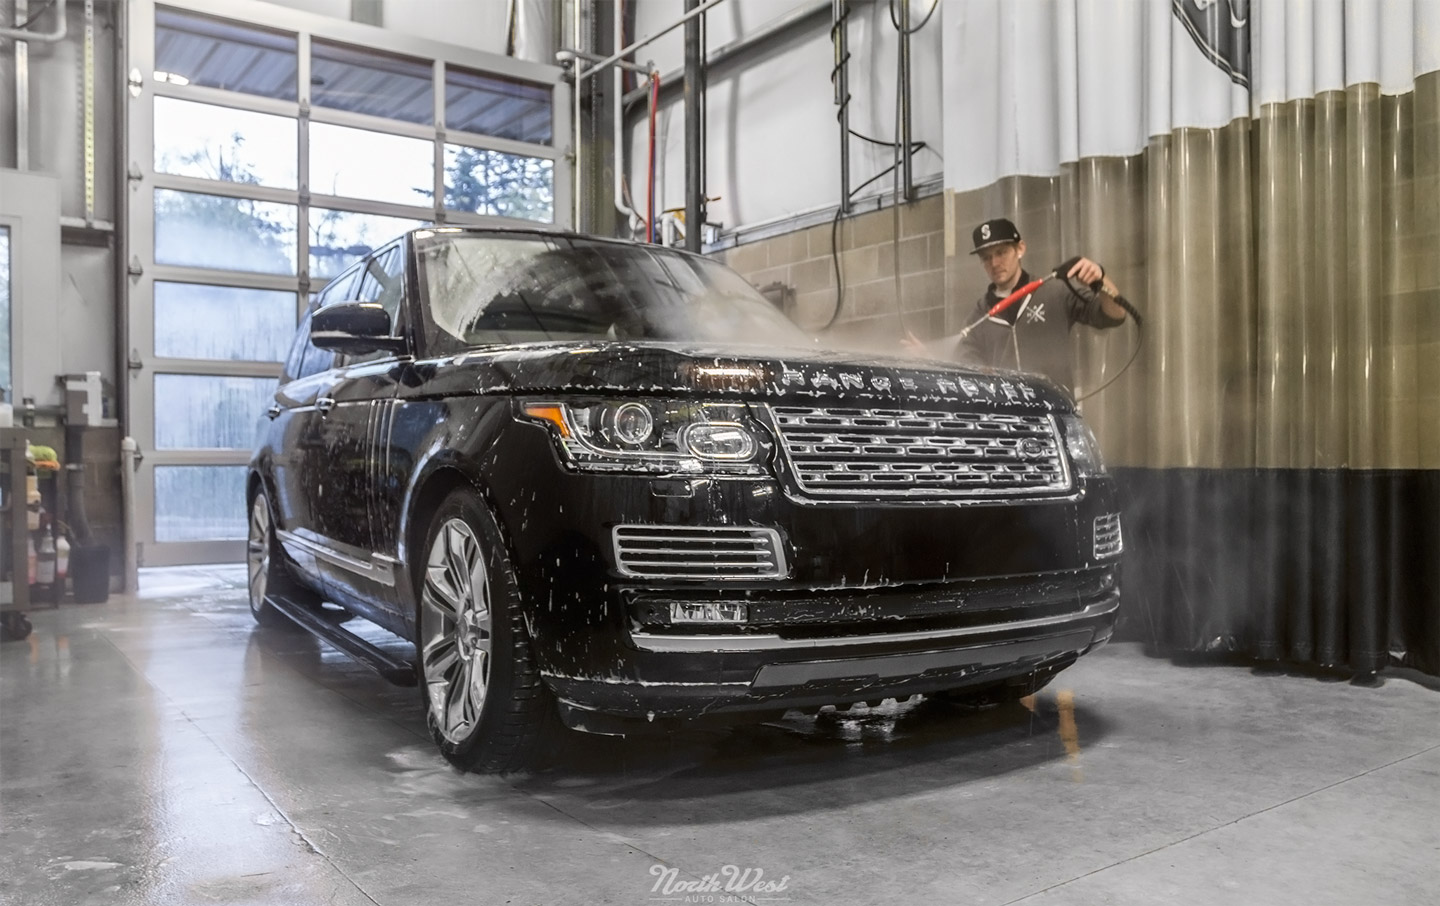 range-rover-sv-autobiography-new-car-detail-xpel-stealth-ppf-wrap-hand-wash-car-wash